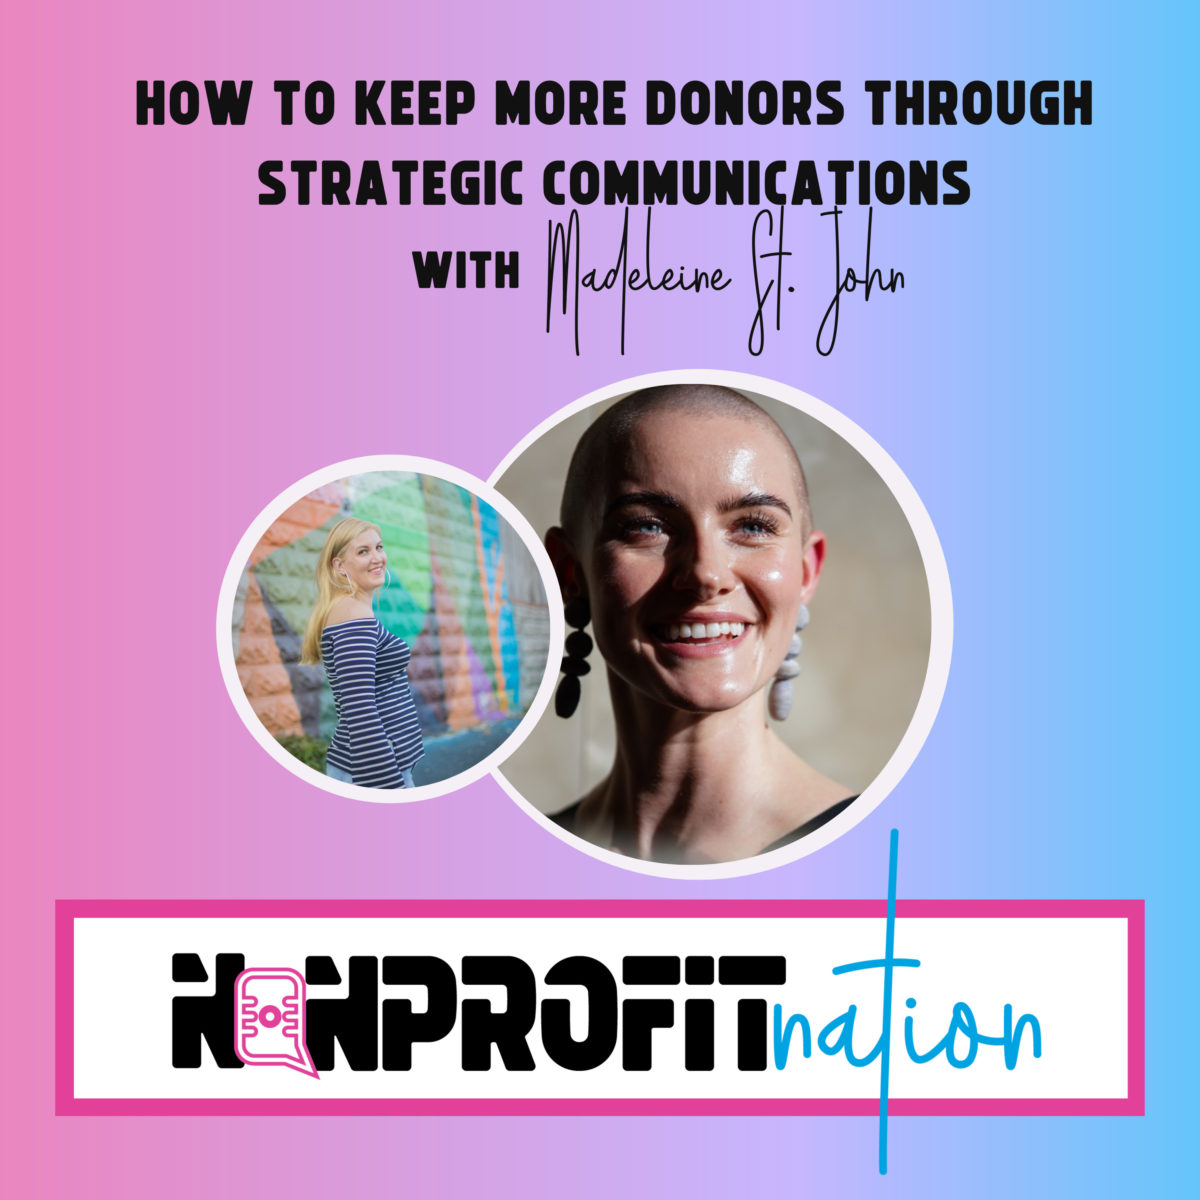 How to Keep More Donors Through Strategic Communications with Madeleine St. John